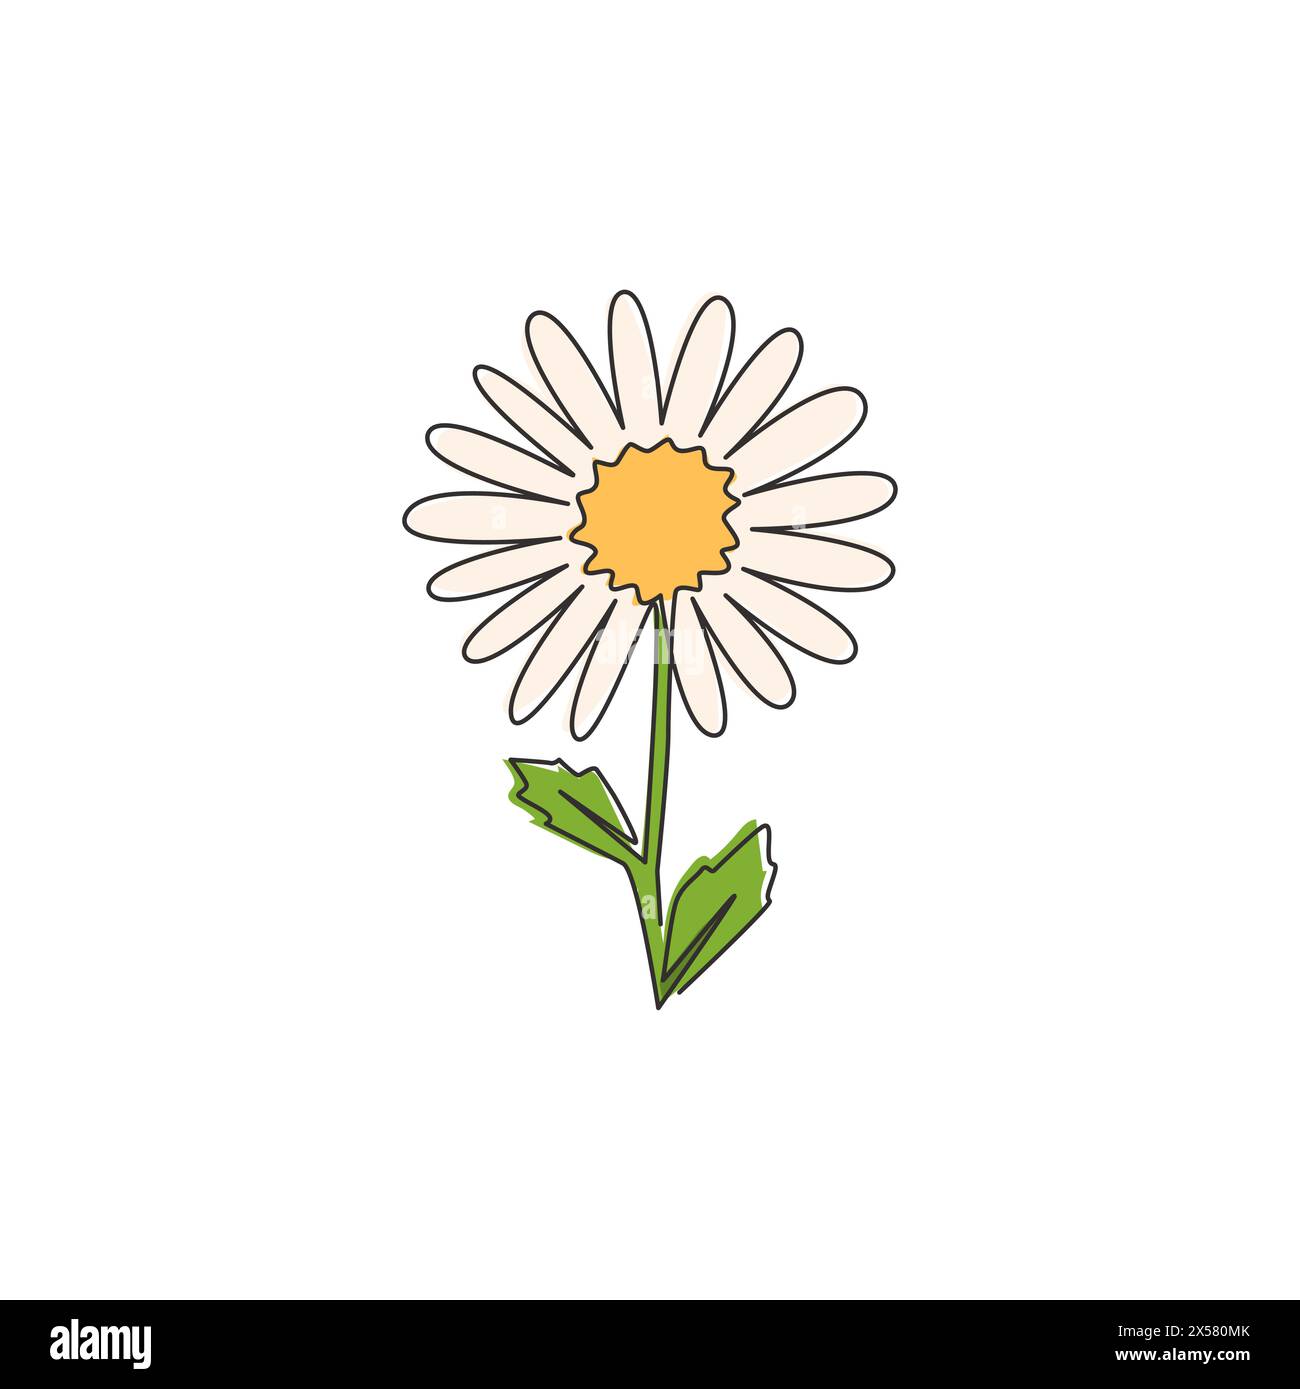 One continuous line drawing of beauty fresh bellis perennis for wall decor art poster. Printable decorative daisy flower concept for fabric textile. M Stock Vector